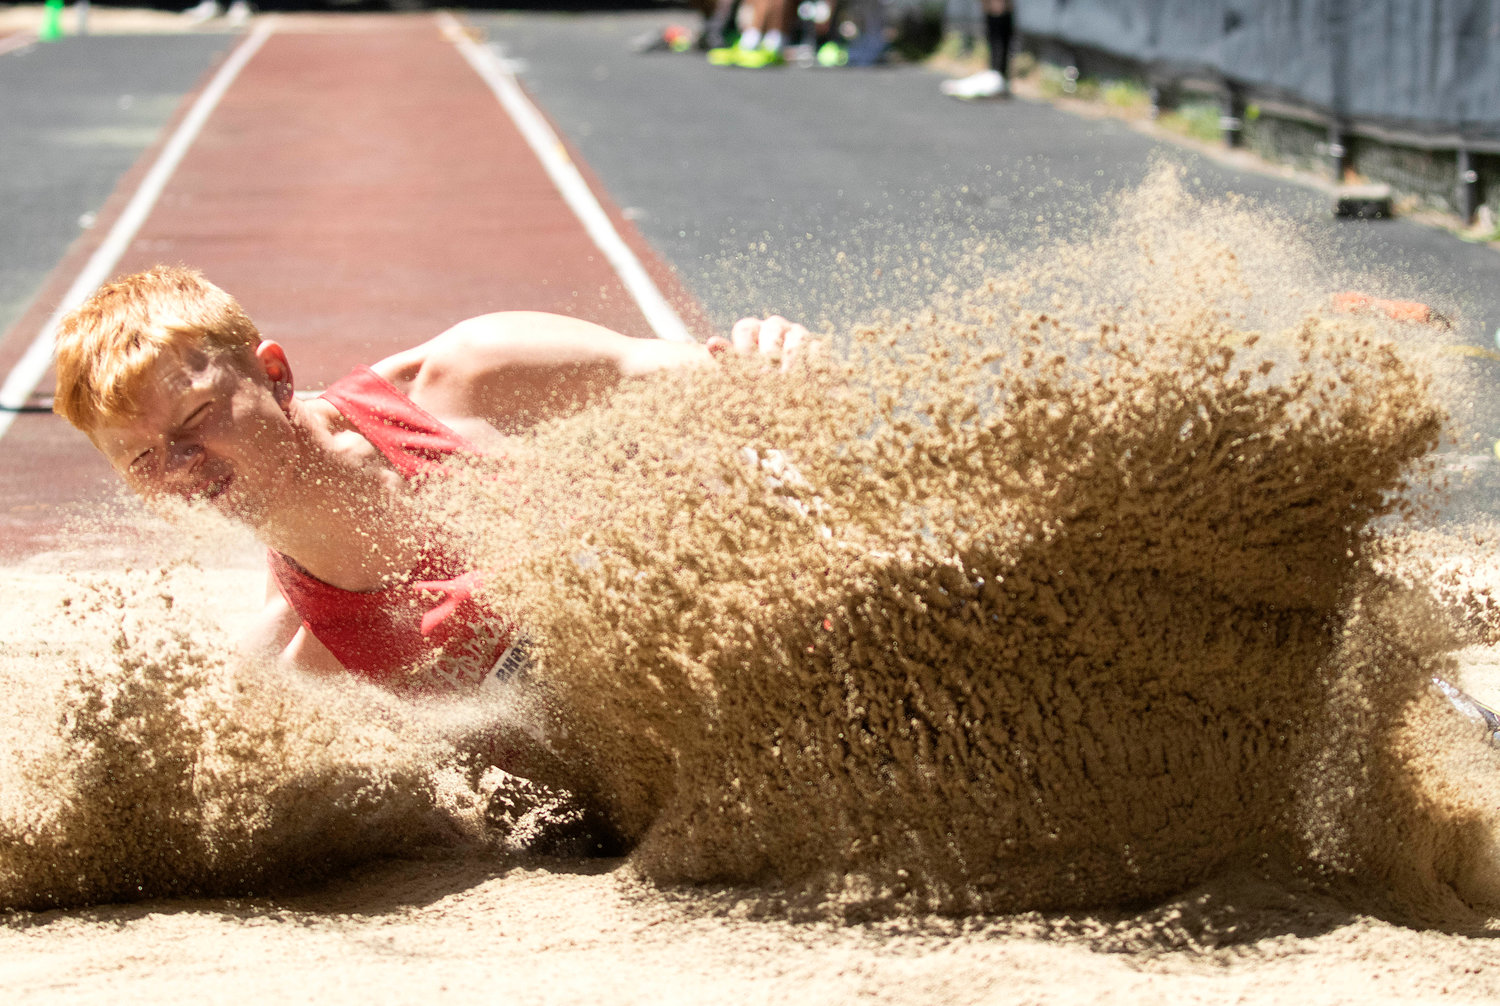 Colby Fahrney splashes down in the long jump, in which he came in fourth place.